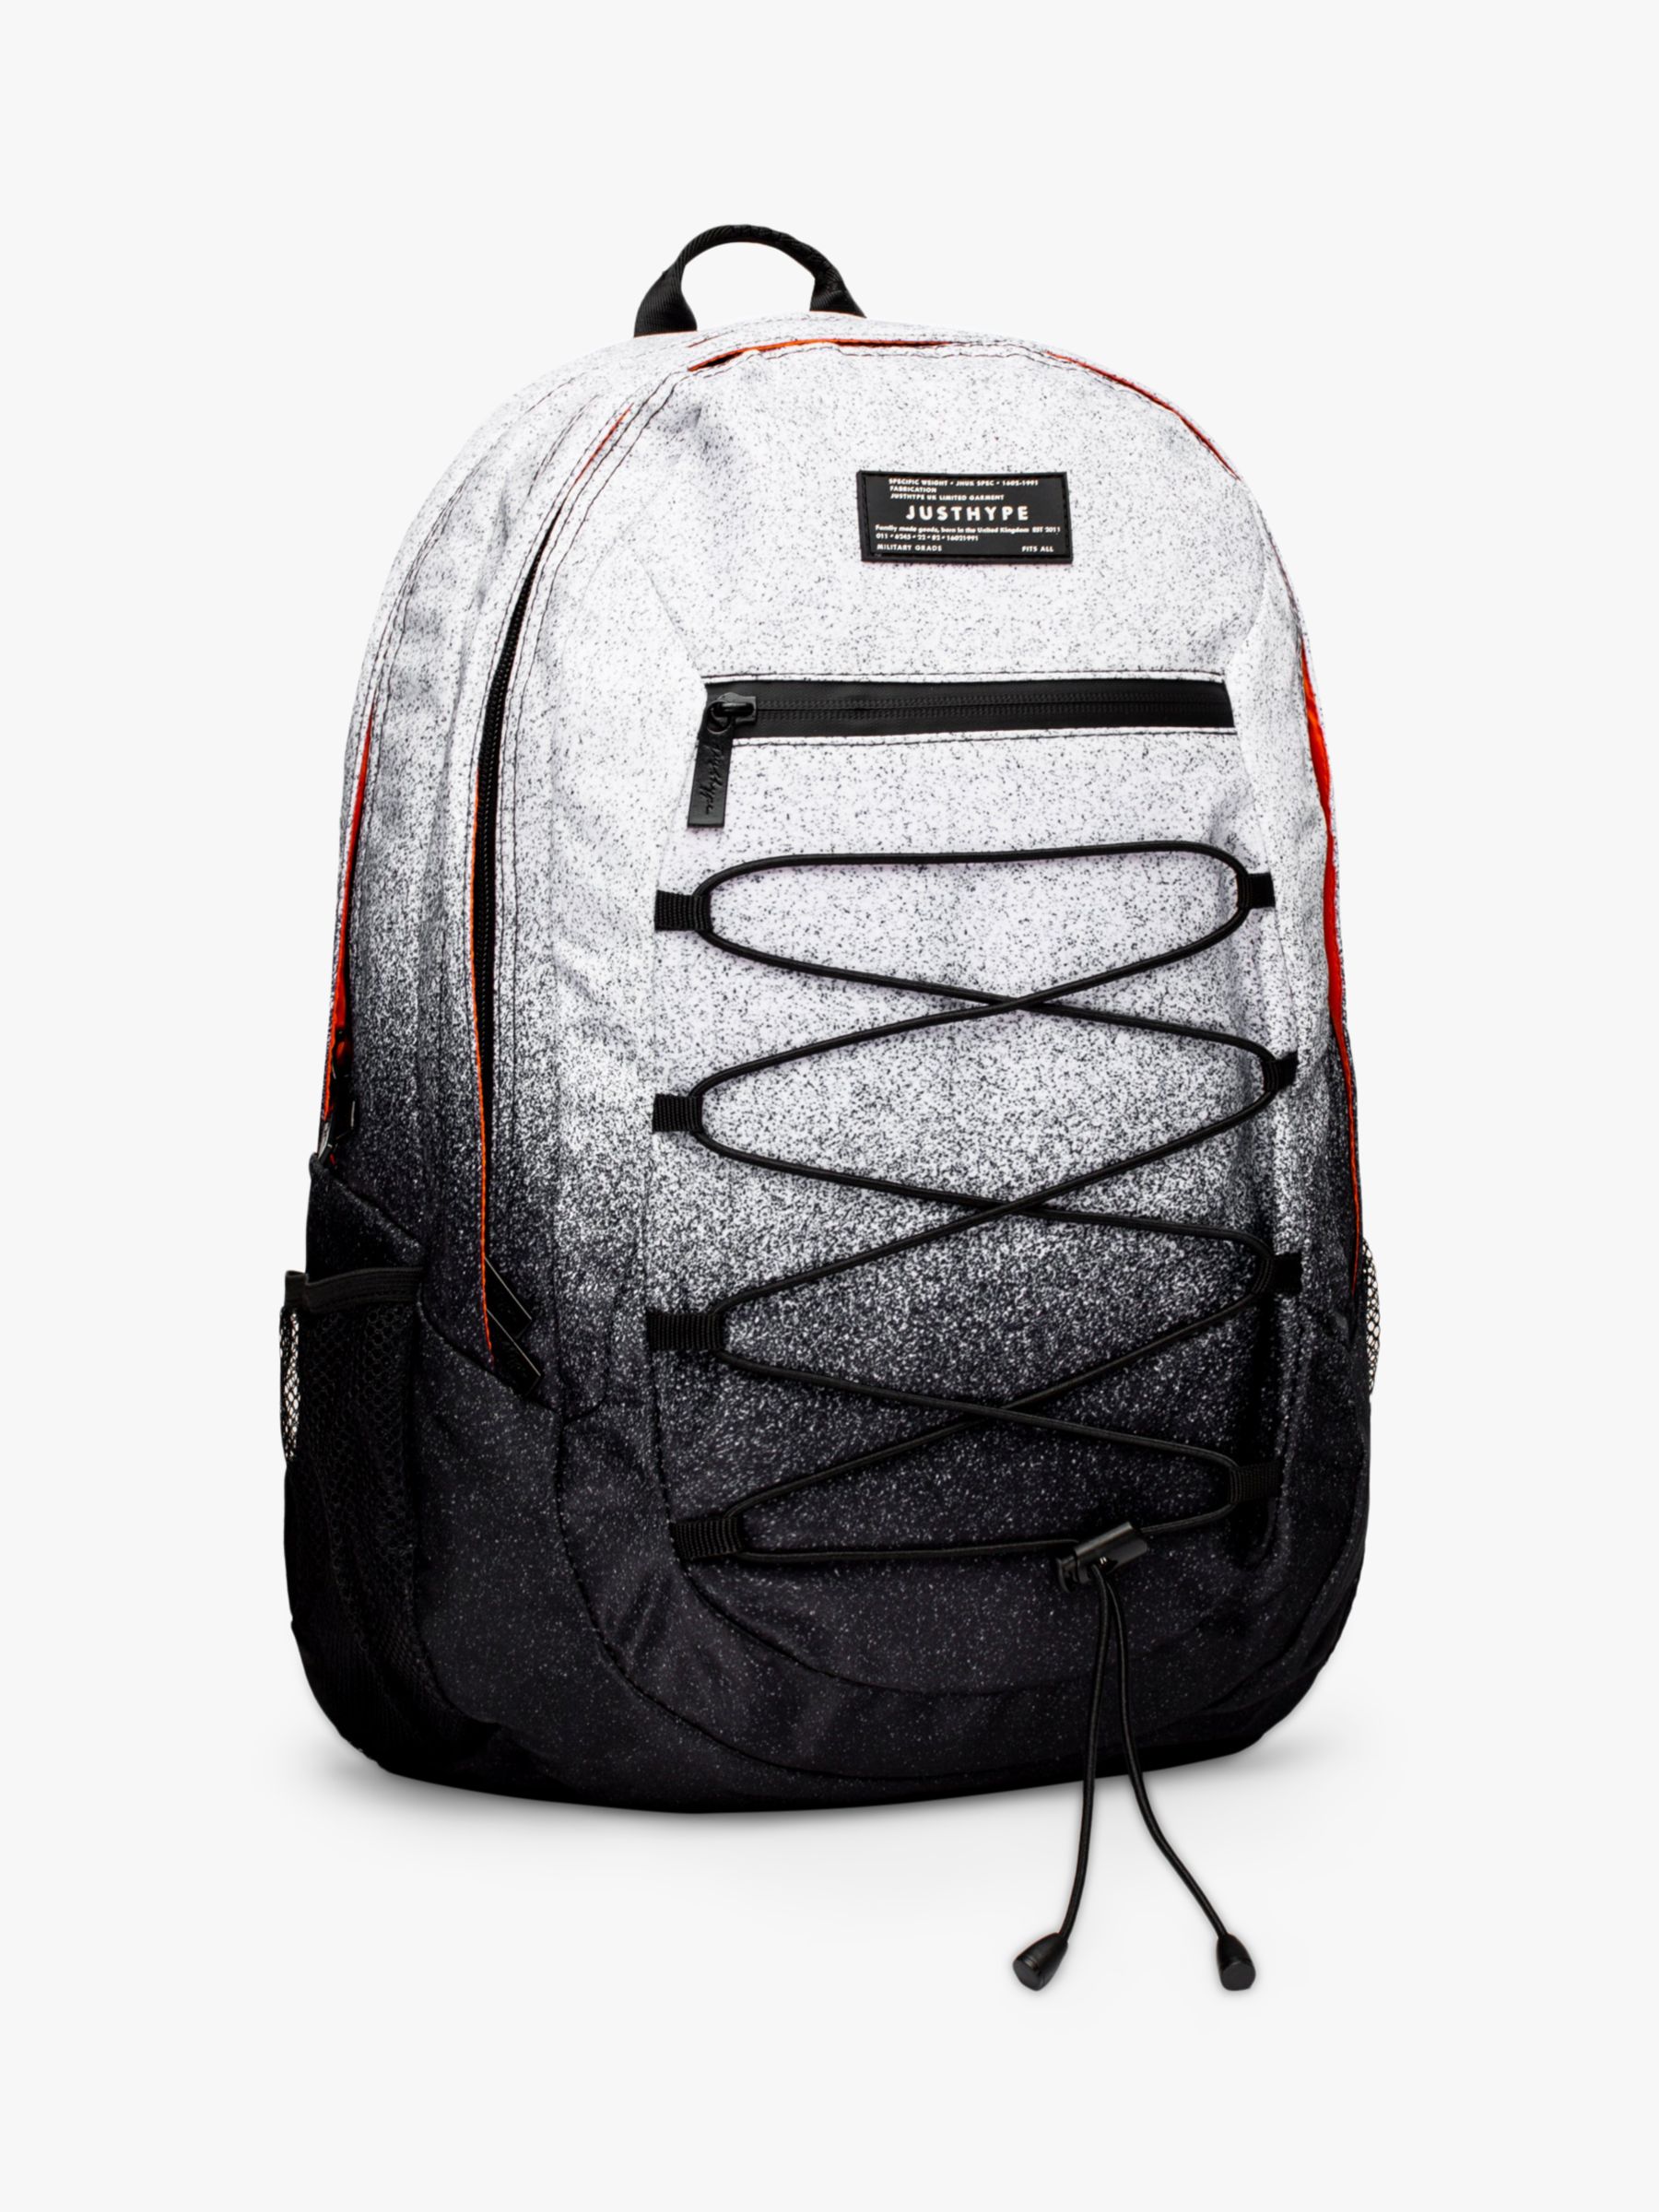 Hype Kids' Speckle Fade Maxi Backpack, Black/White